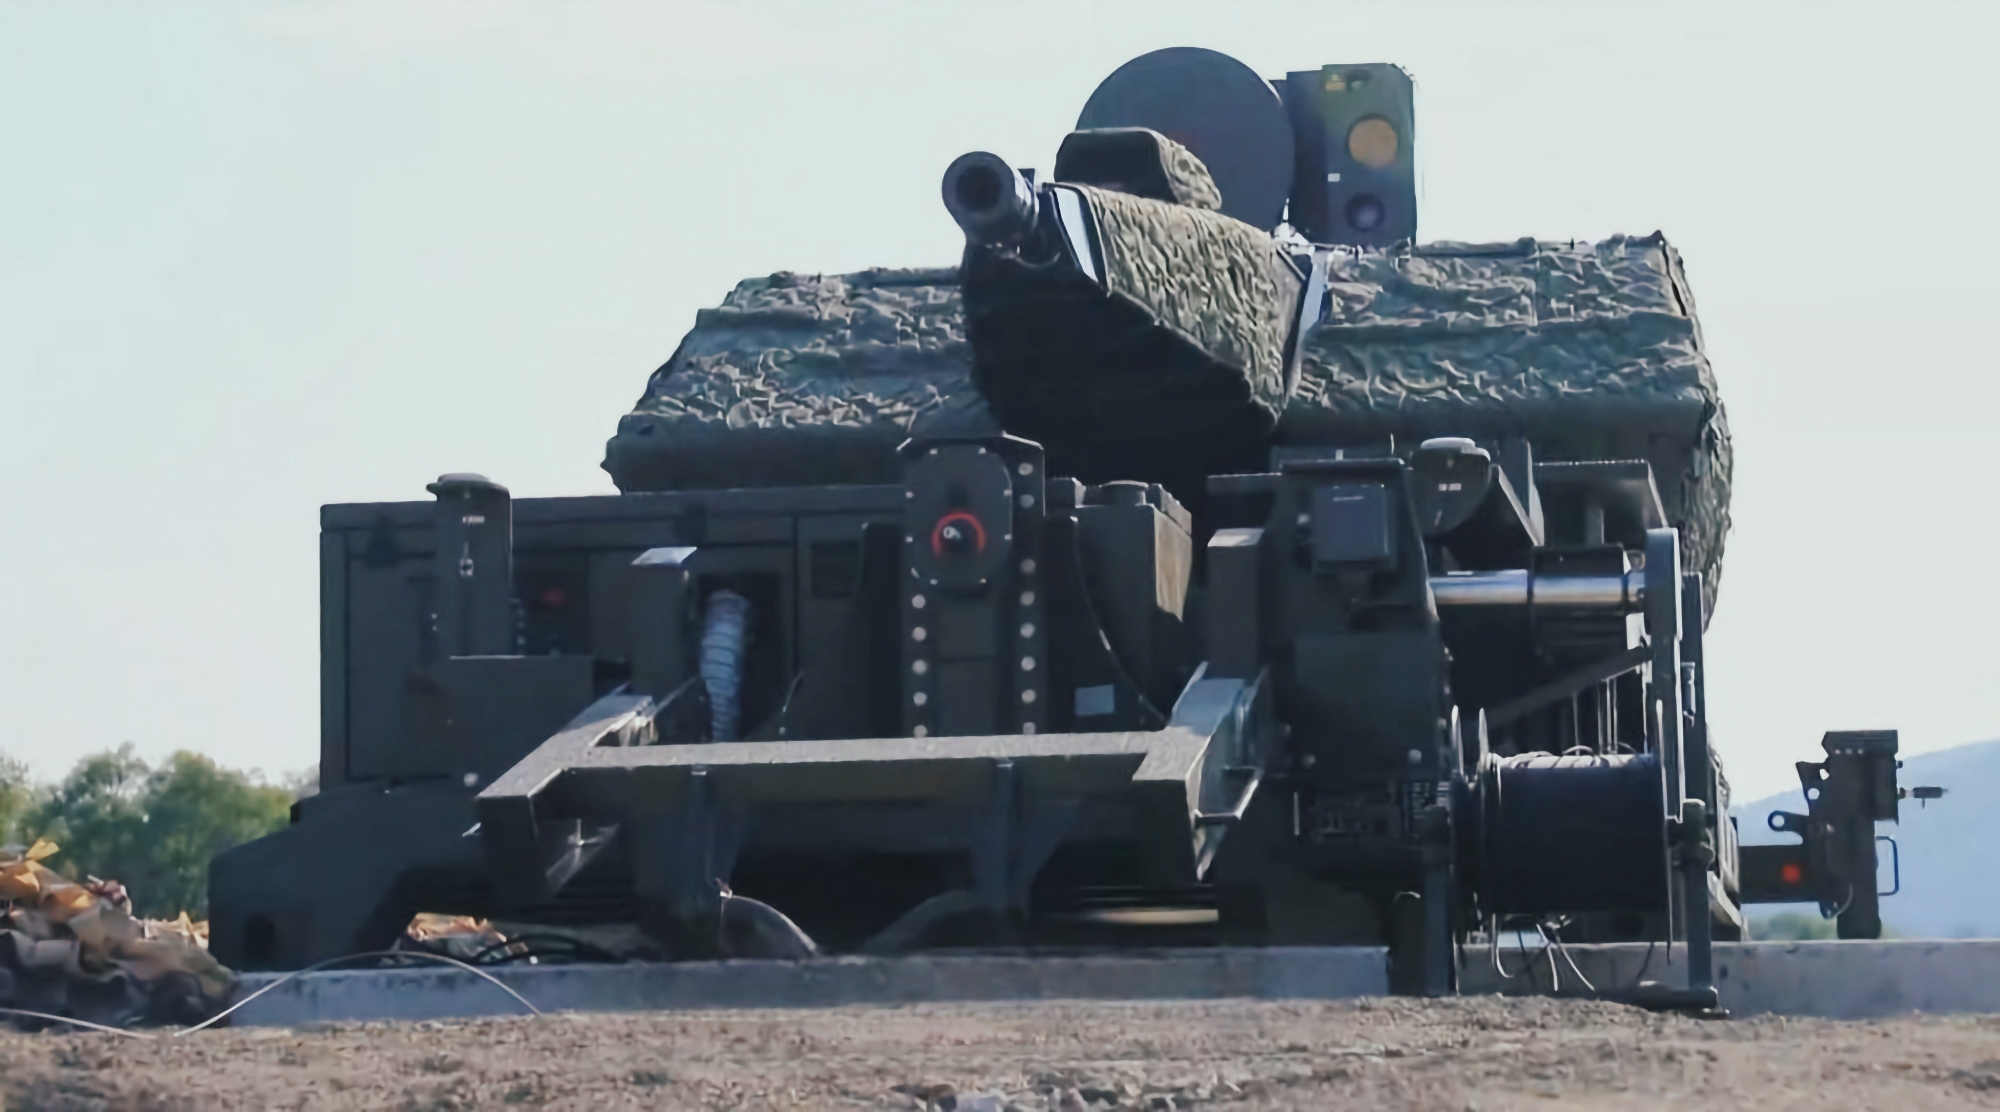 The Ukrainian Air Force showed for the first time the Skynex air defence system, it can destroy drones and missiles